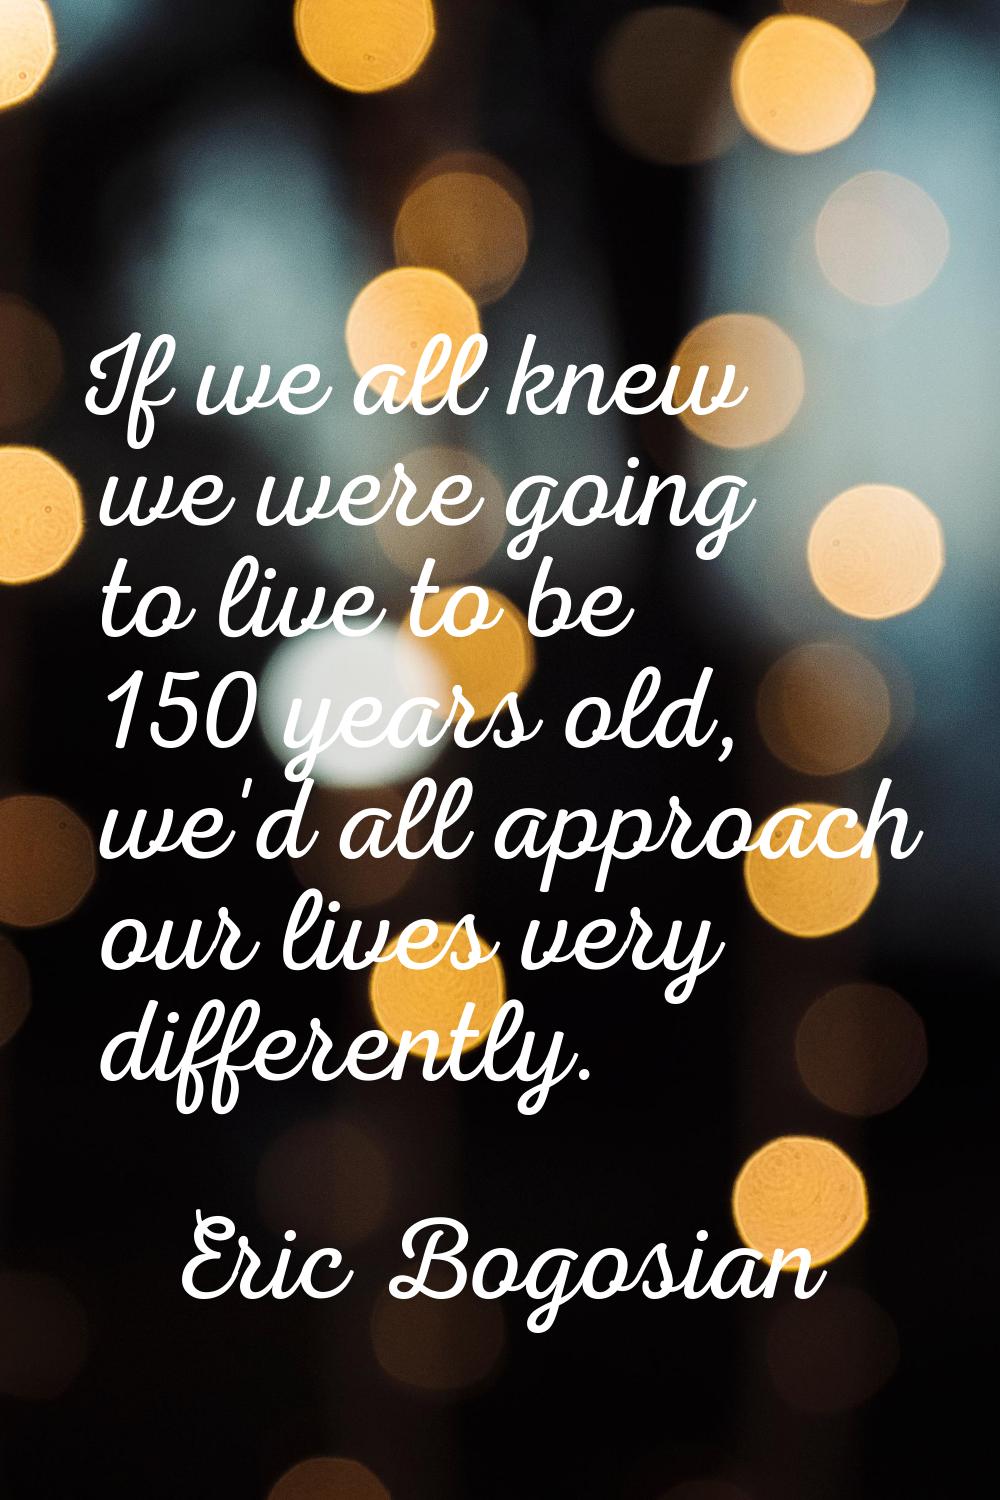 If we all knew we were going to live to be 150 years old, we'd all approach our lives very differen